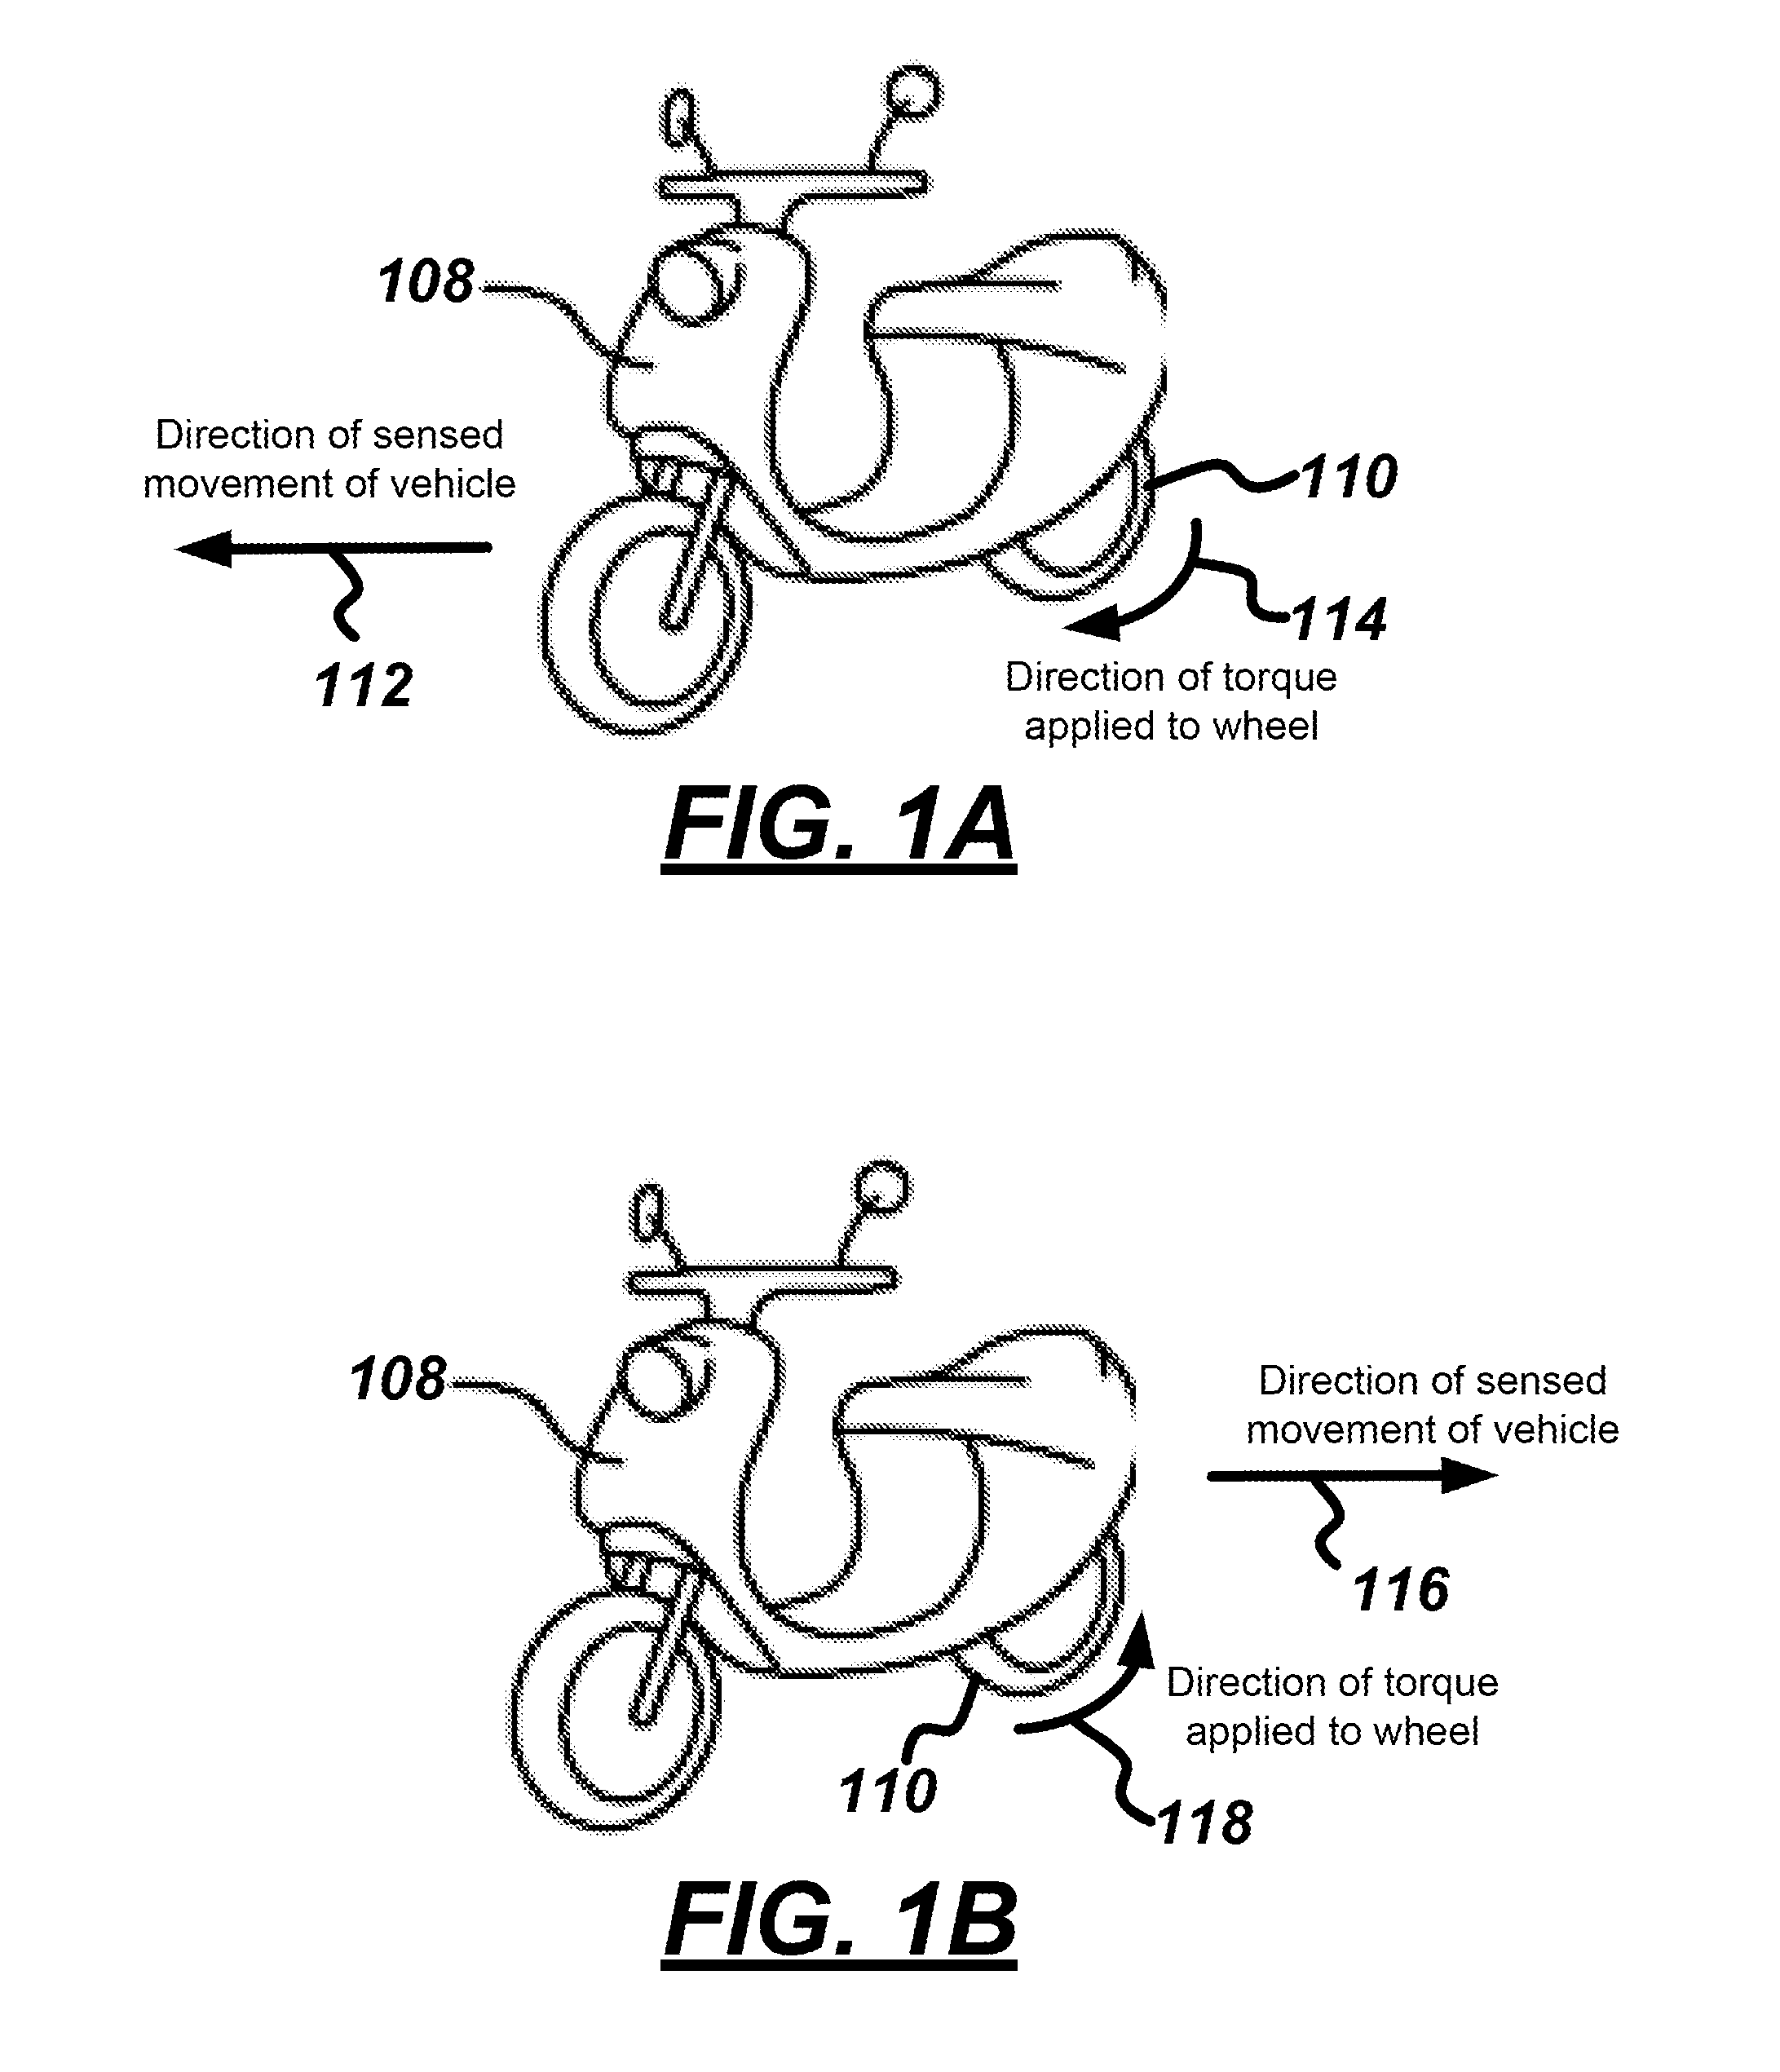 Apparatus, method and article for security of vehicles